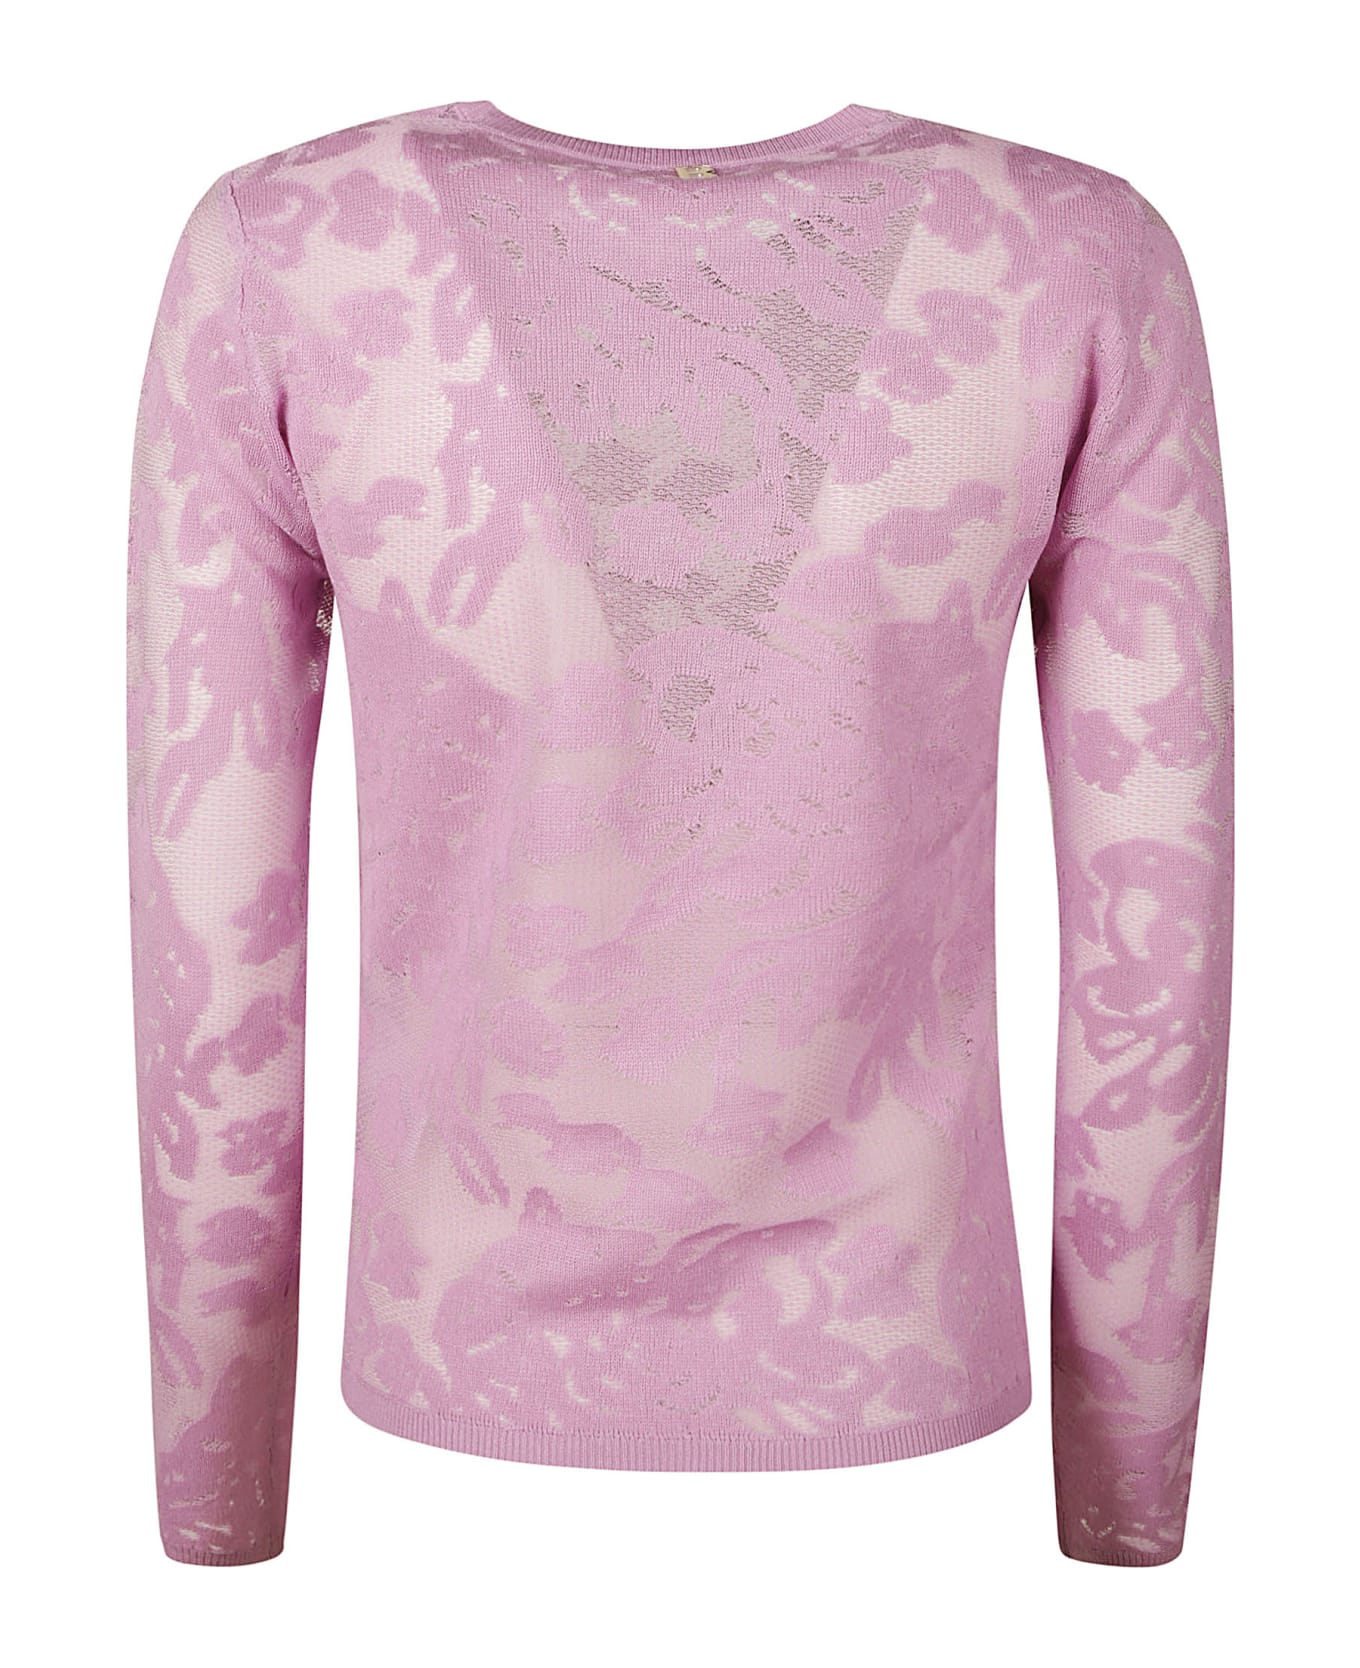 Blugirl Long-sleeved Floral Lace Top - Lilla